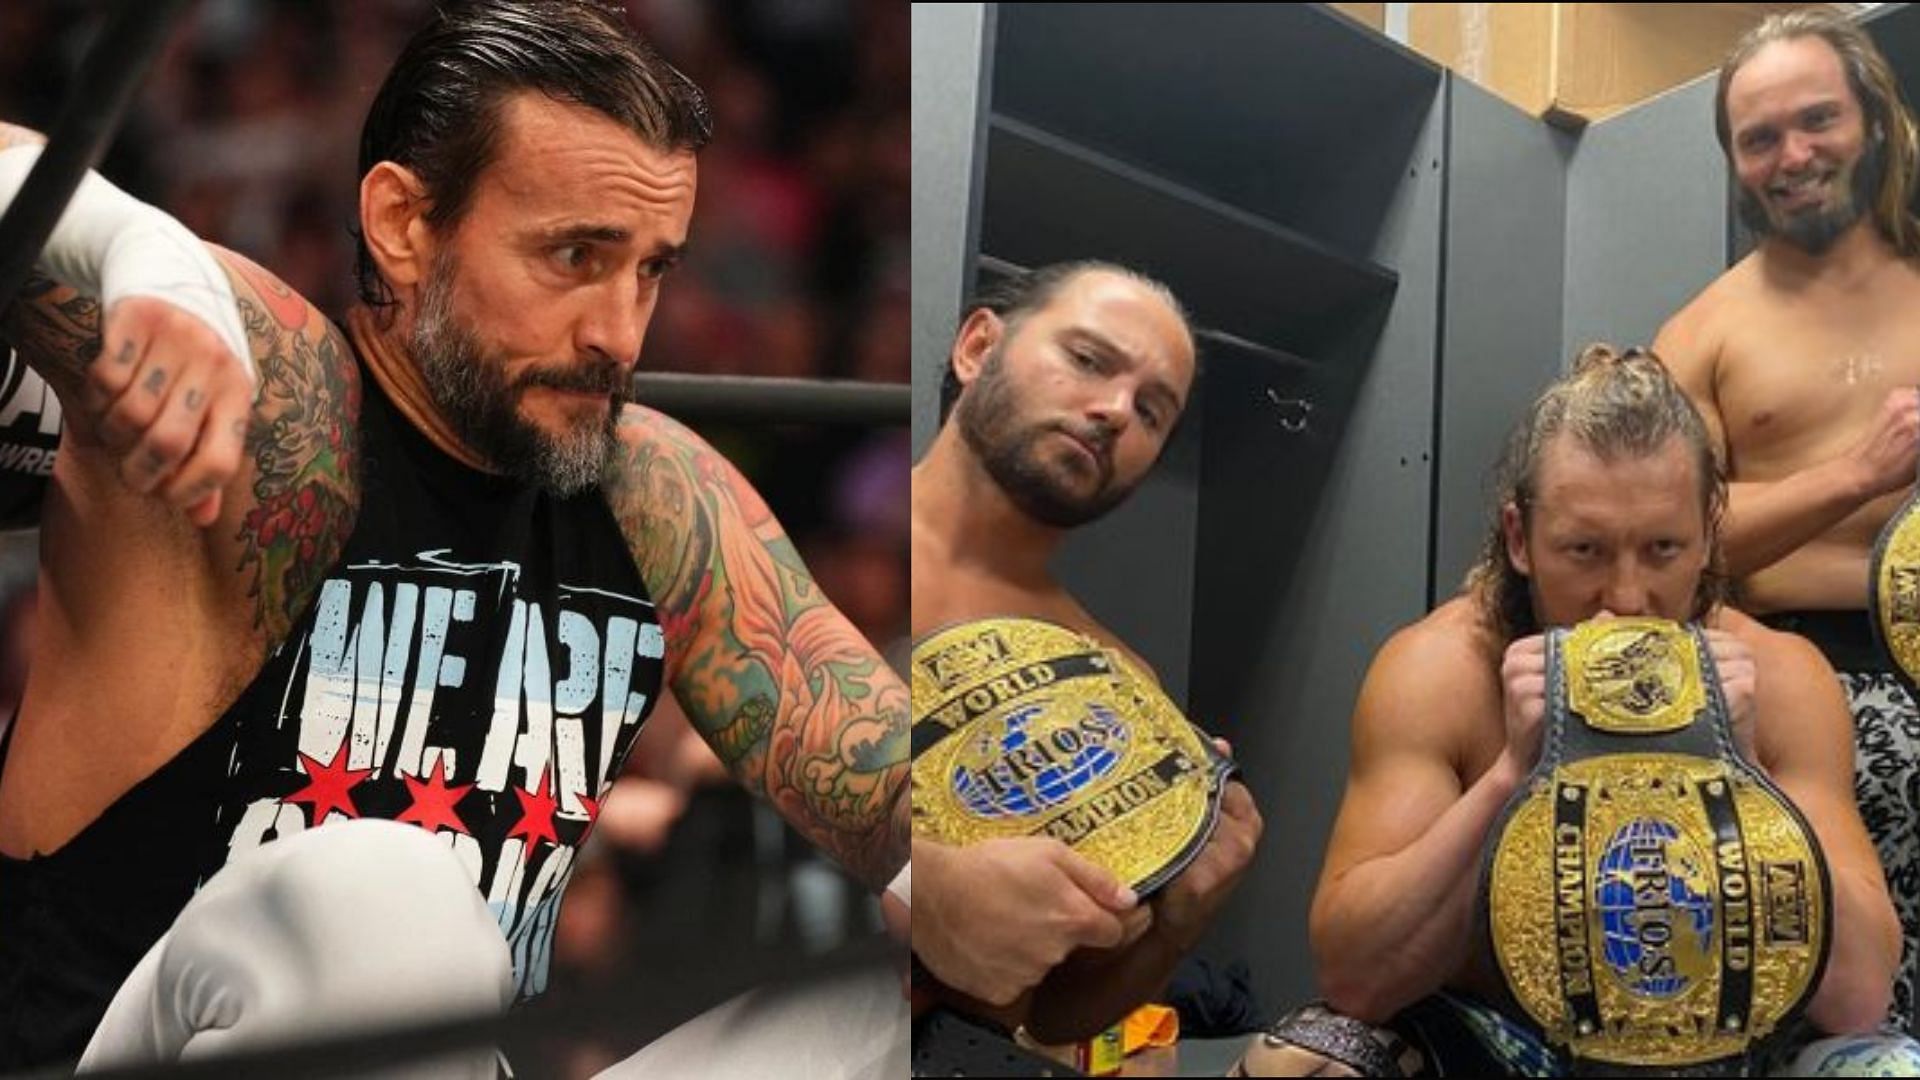 CM Punk and The Elite are both signed to AEW